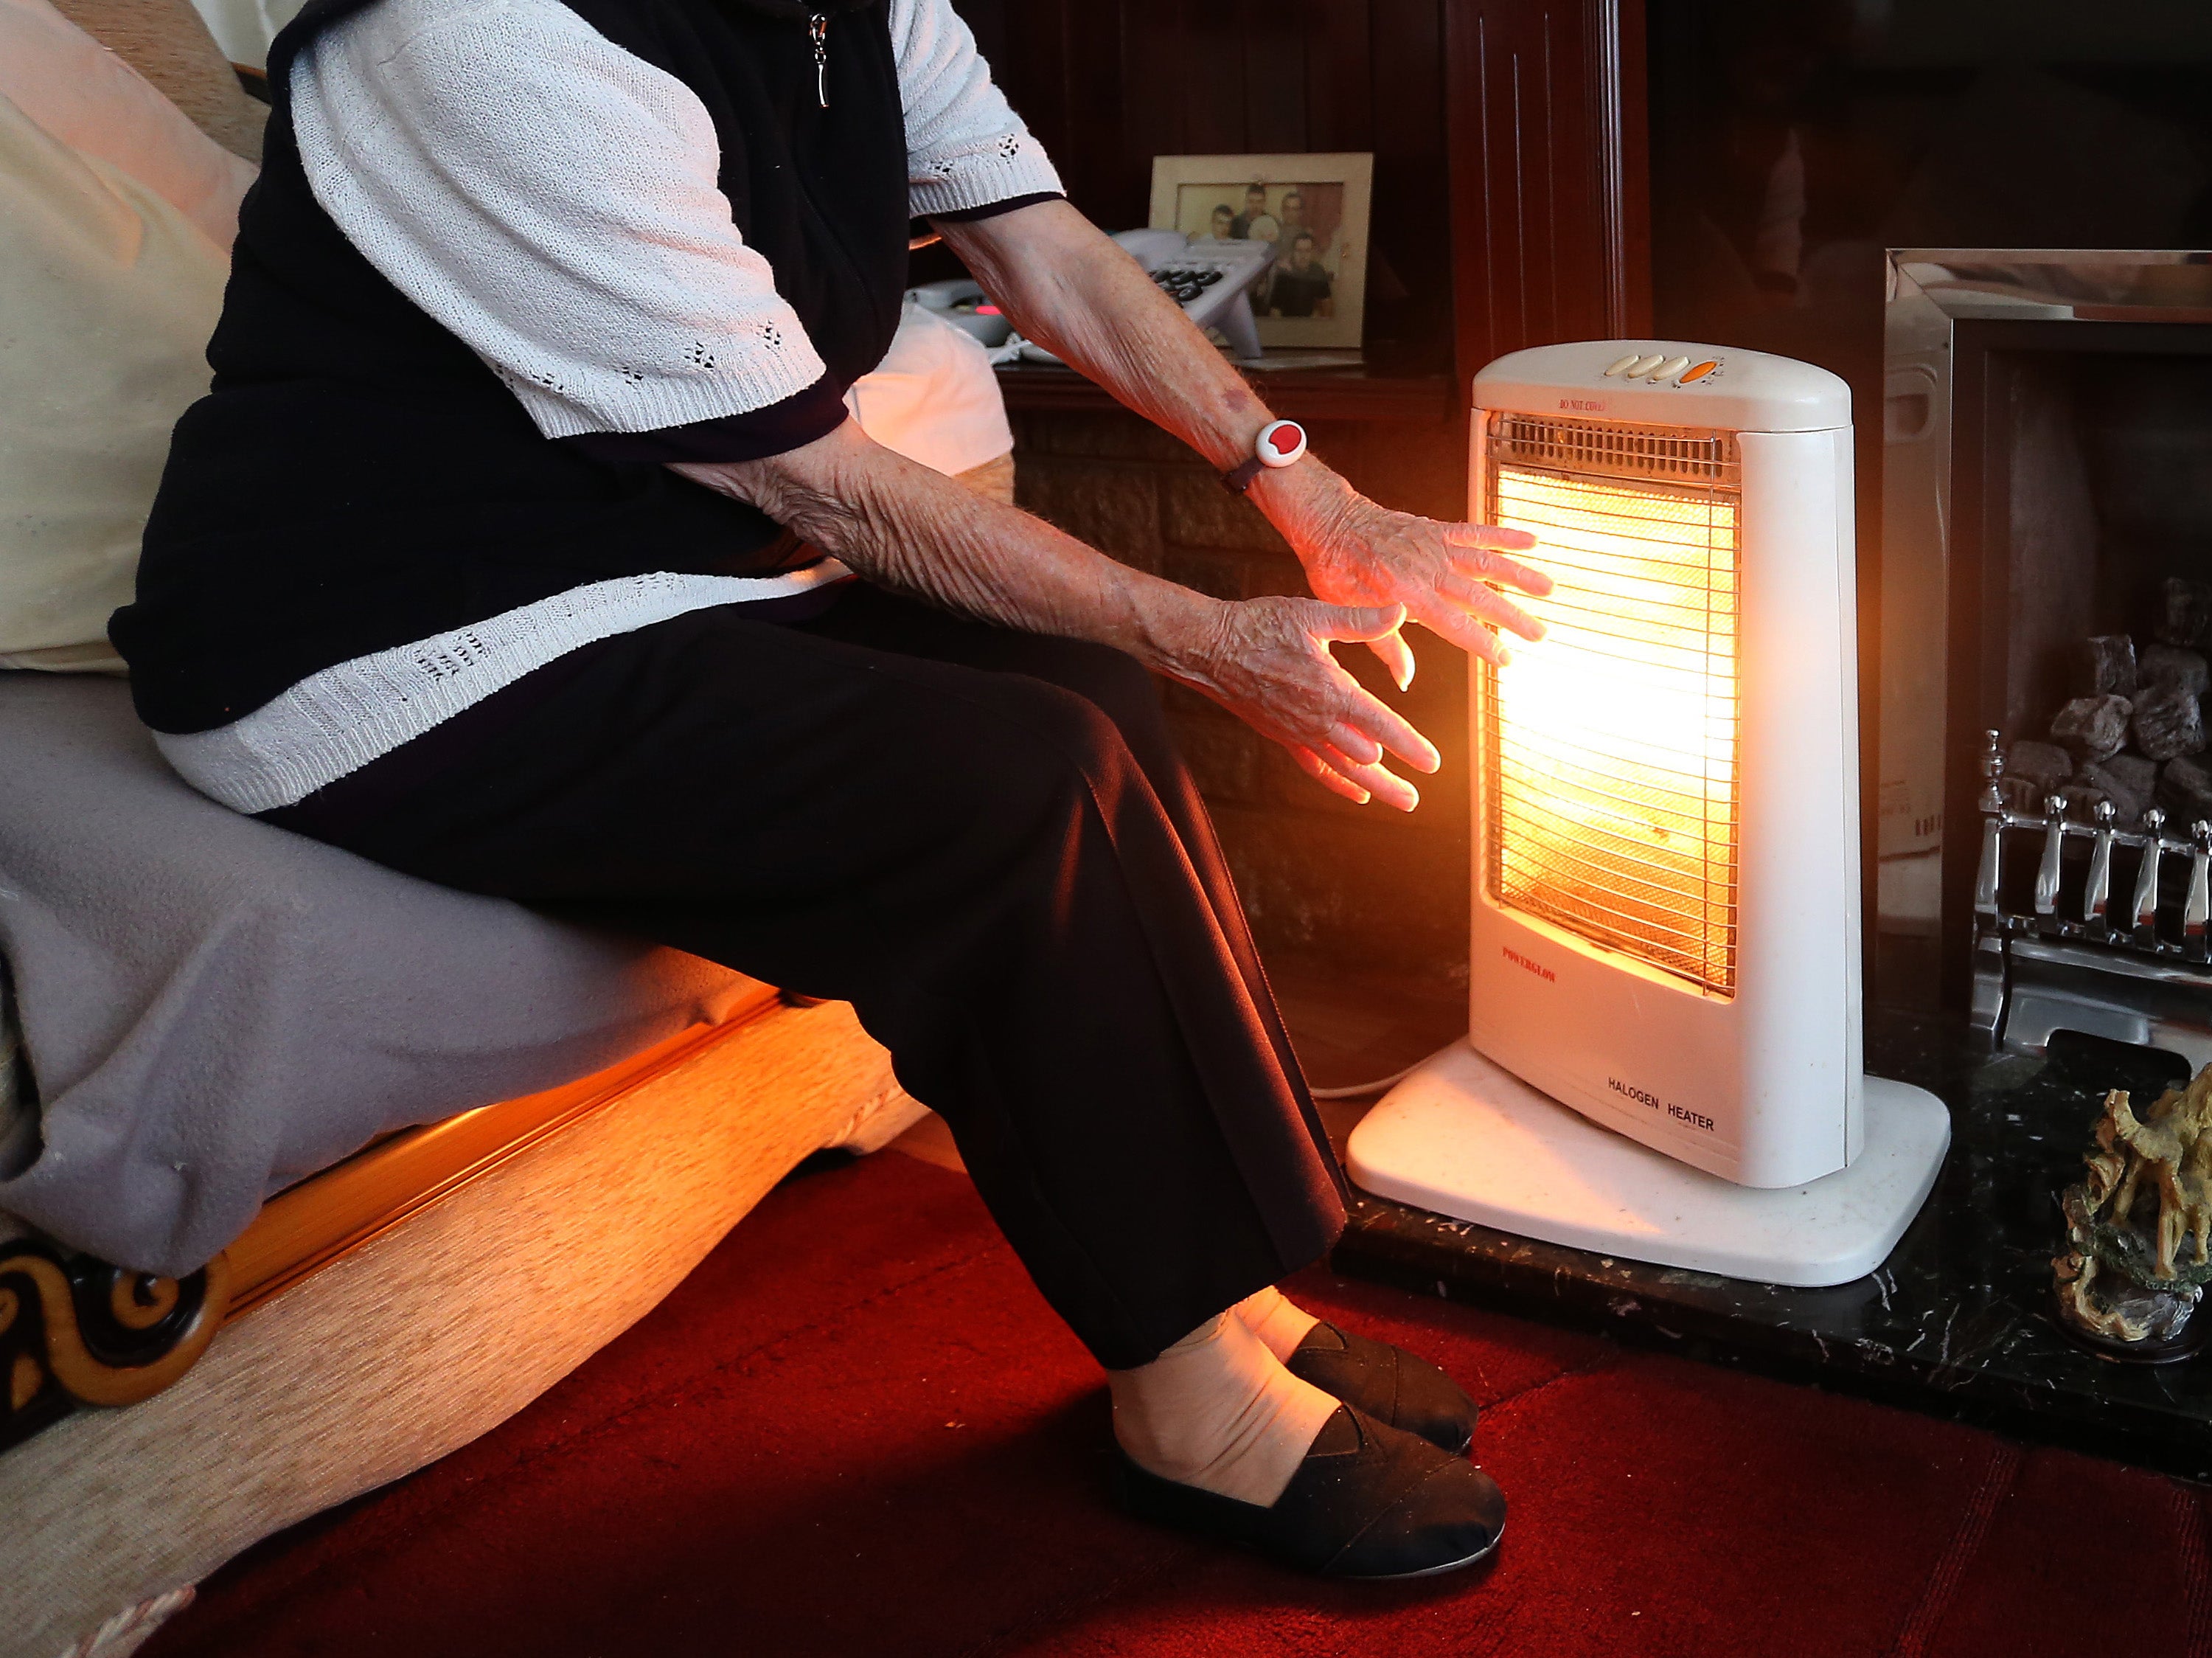 Ofgem announced the energy price cap would increase by 80% in October